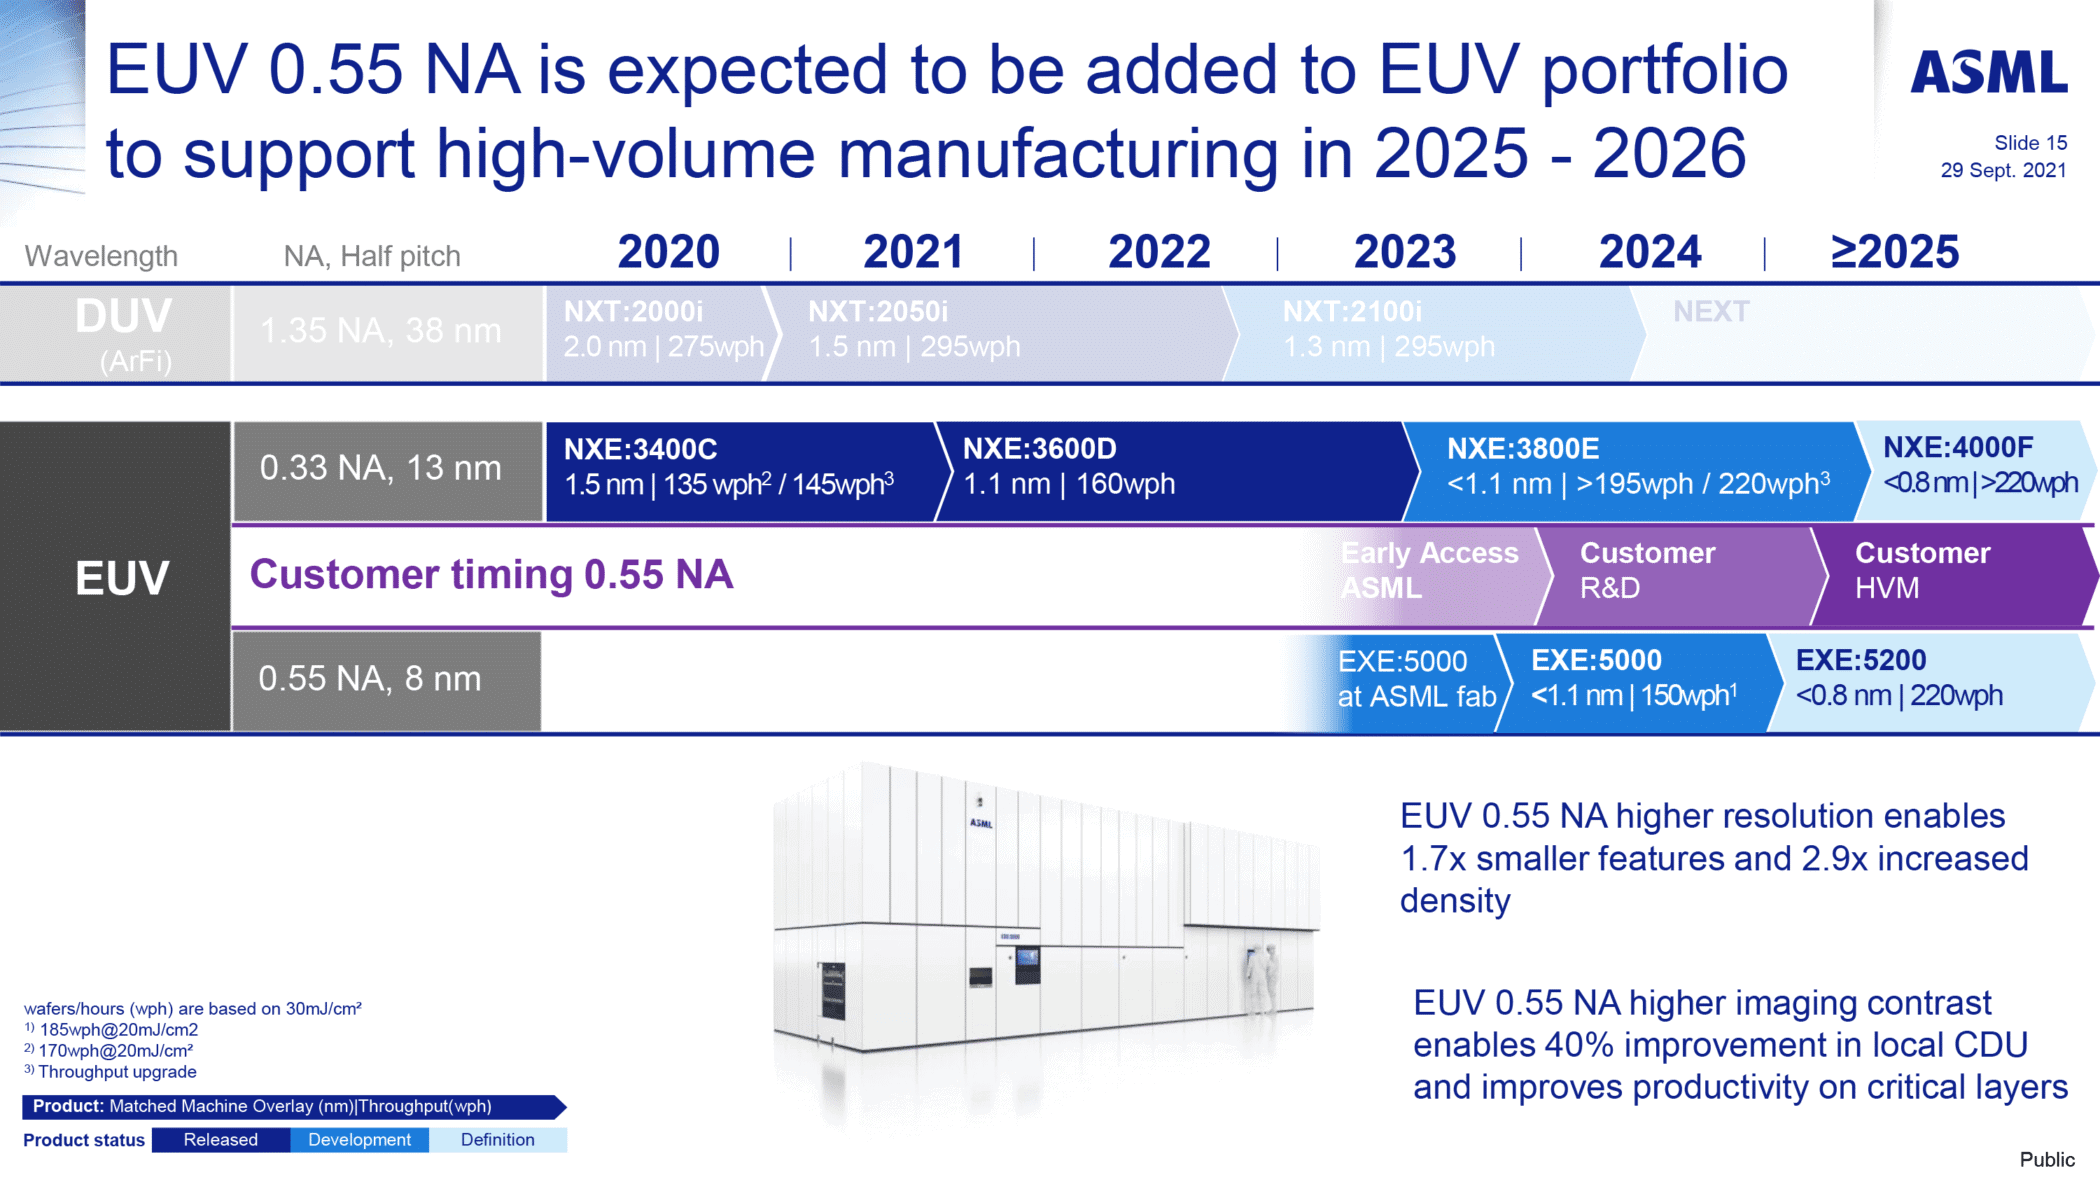 asml euv 0.55 na is expected to be added to euv portfolio